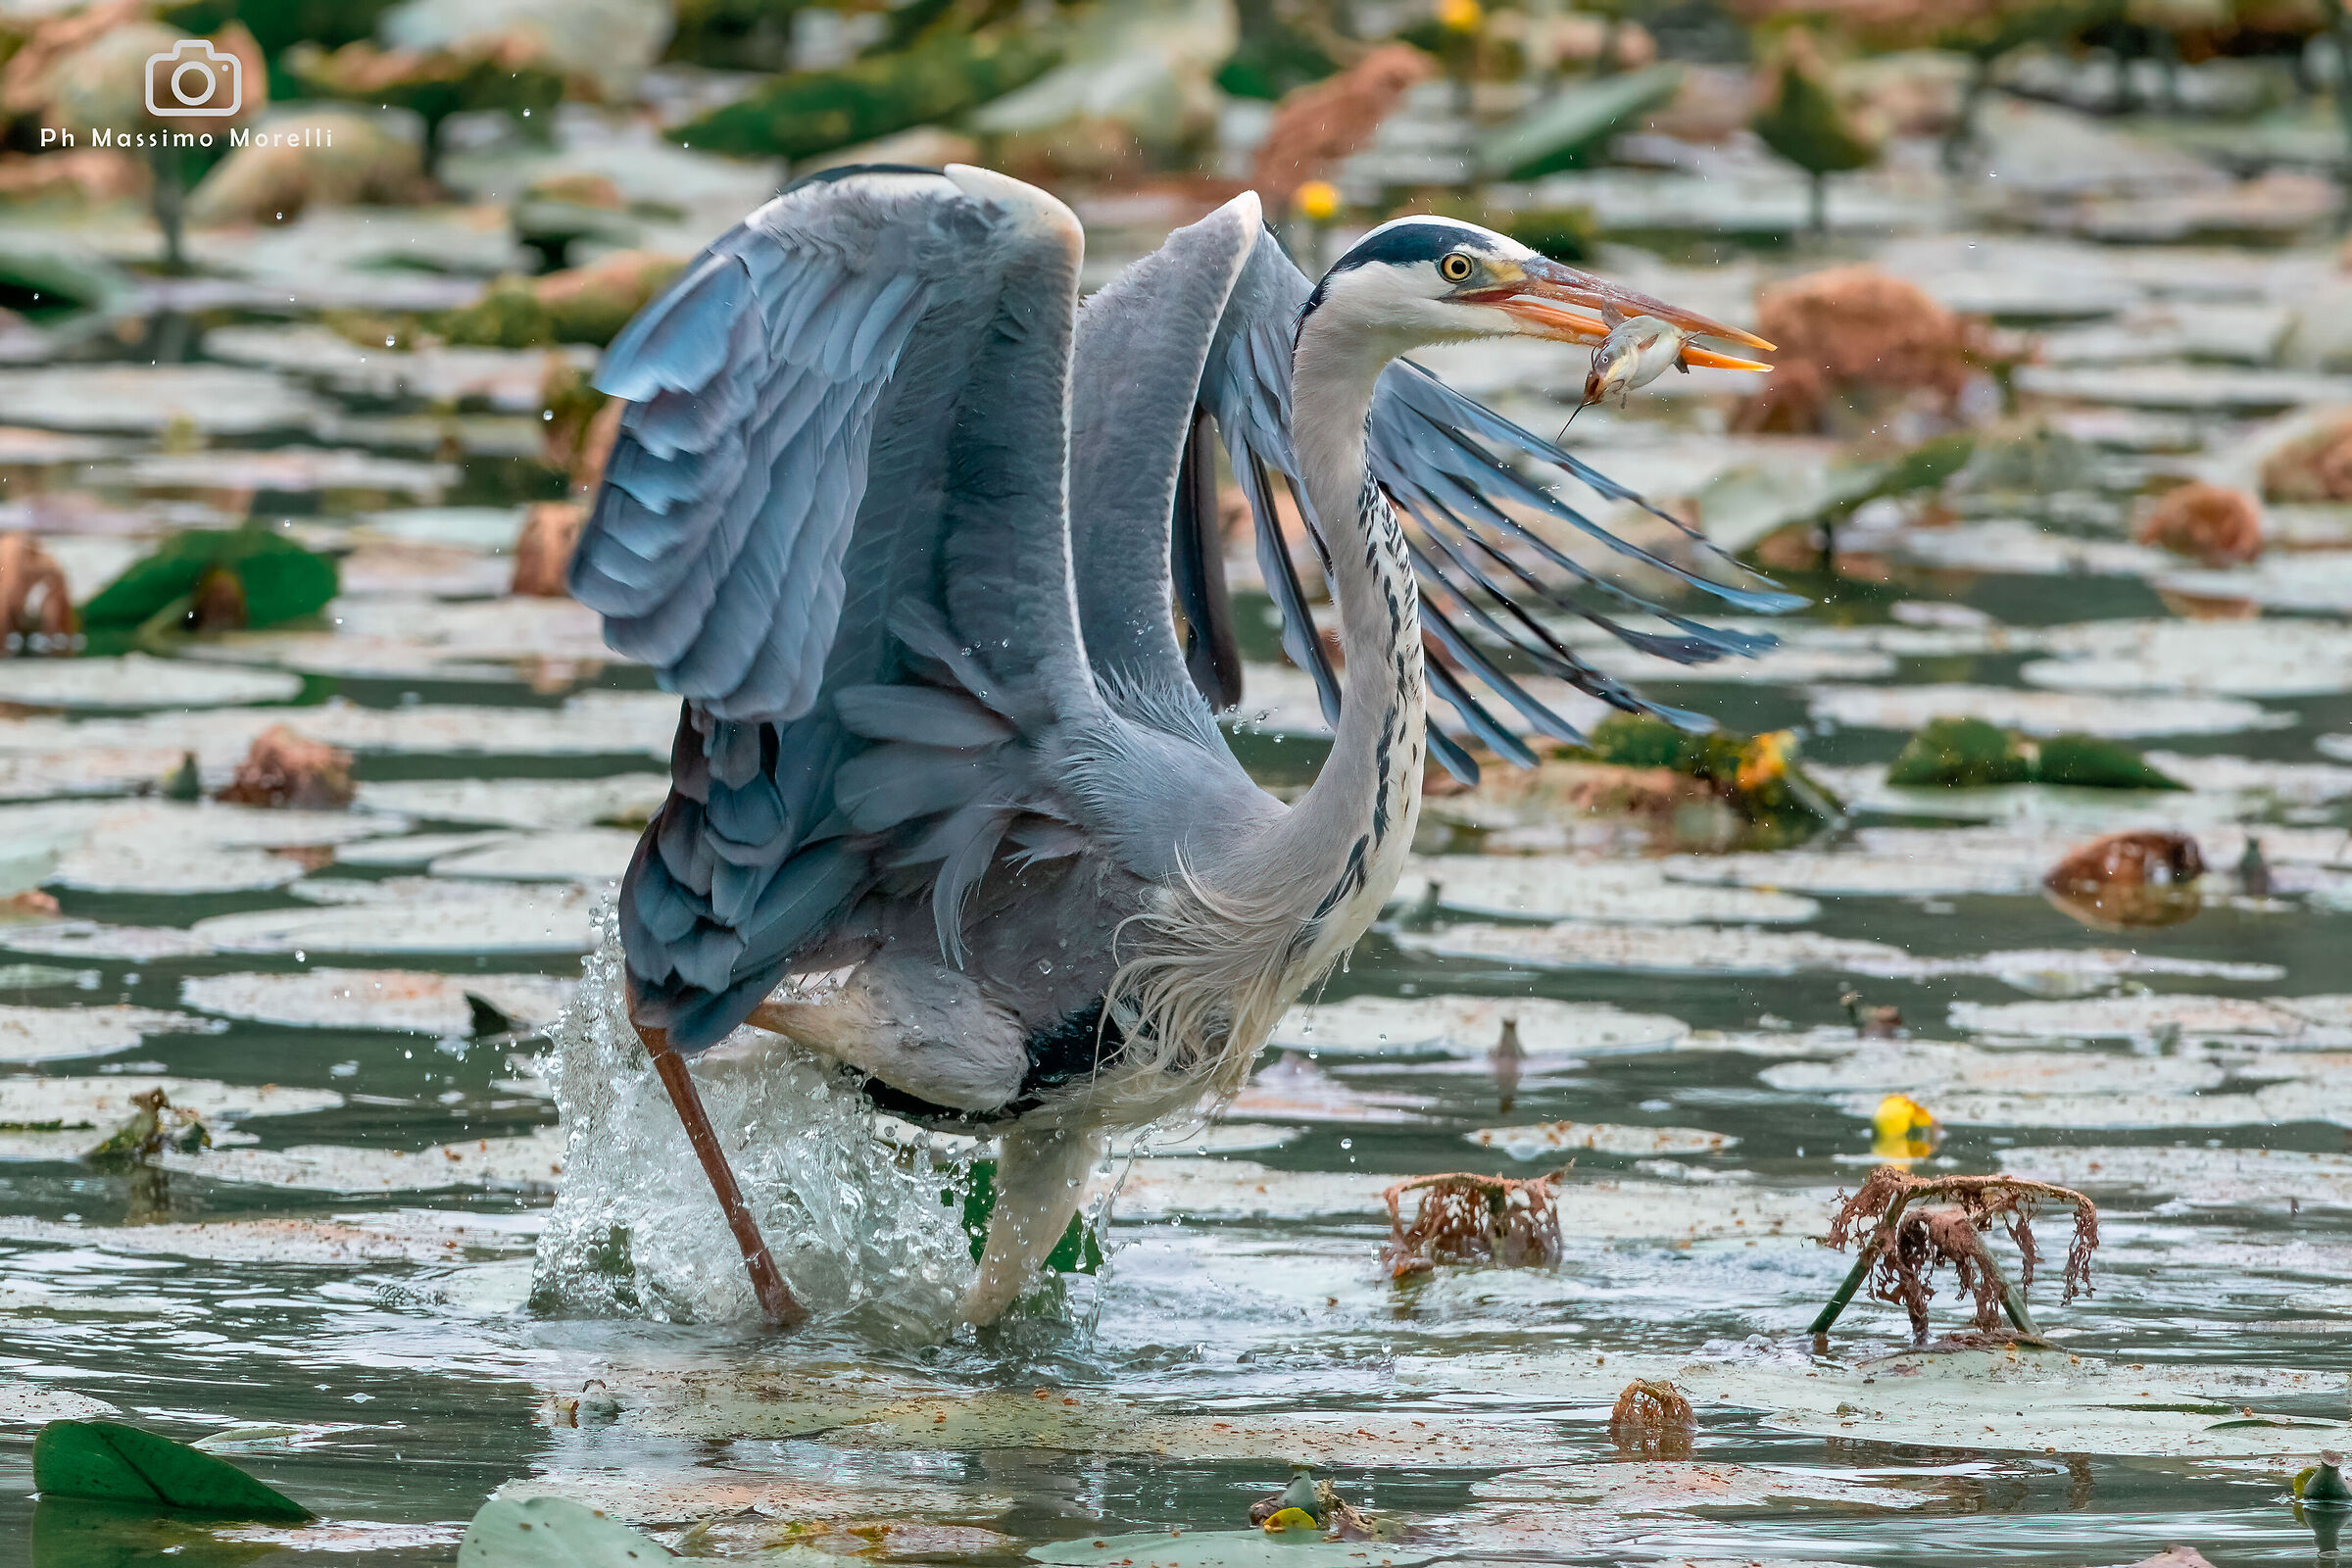 The grey heron fished well...